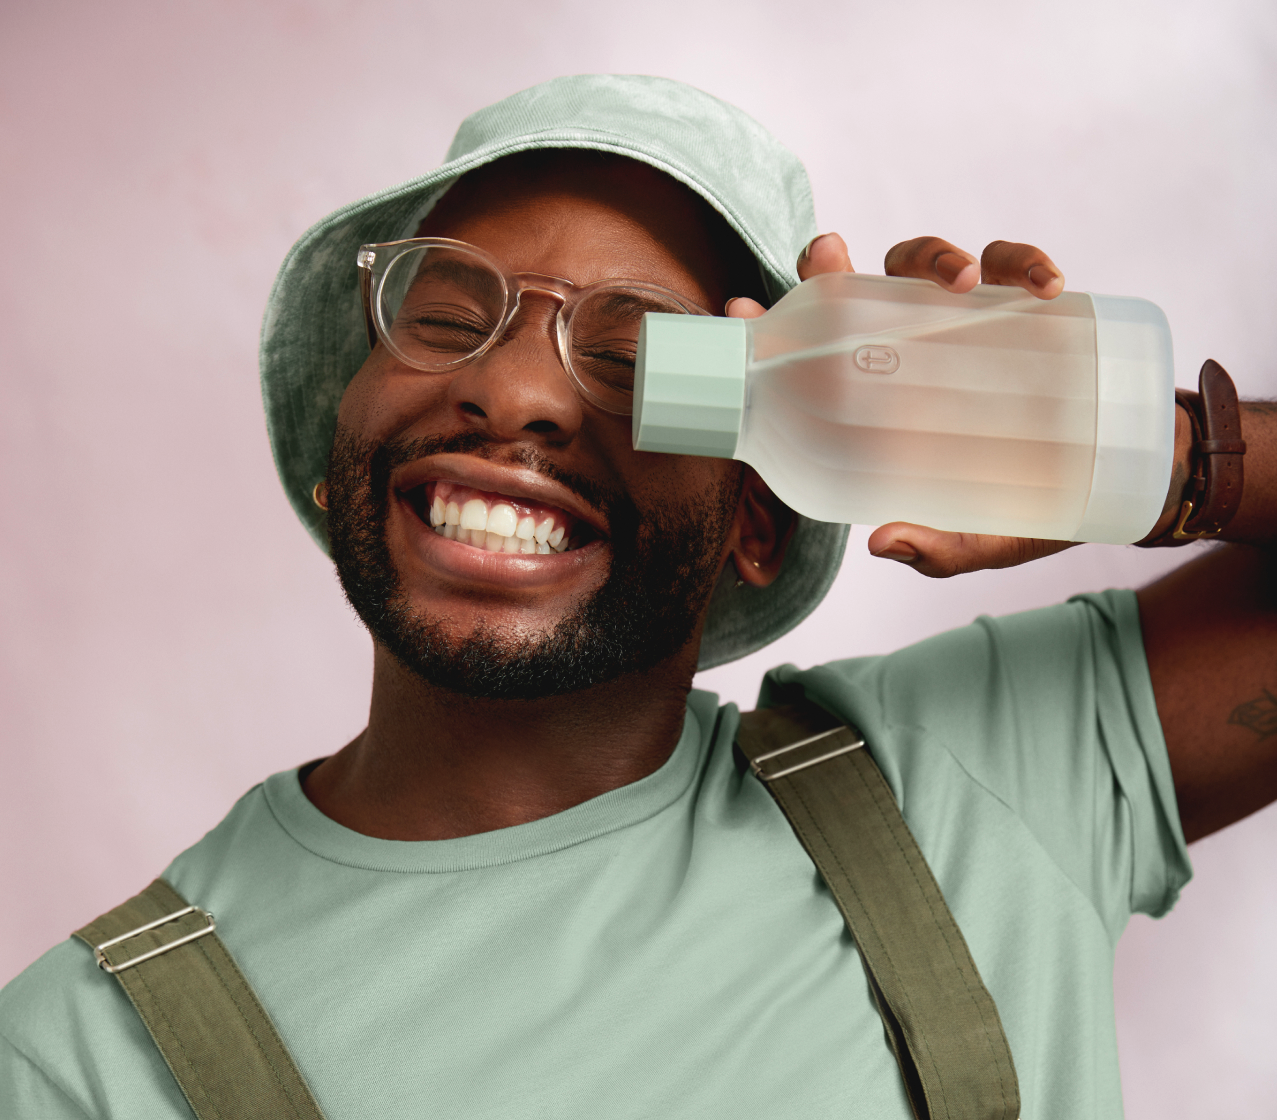 Man in hat holding Tonic decanter sideways and smiling